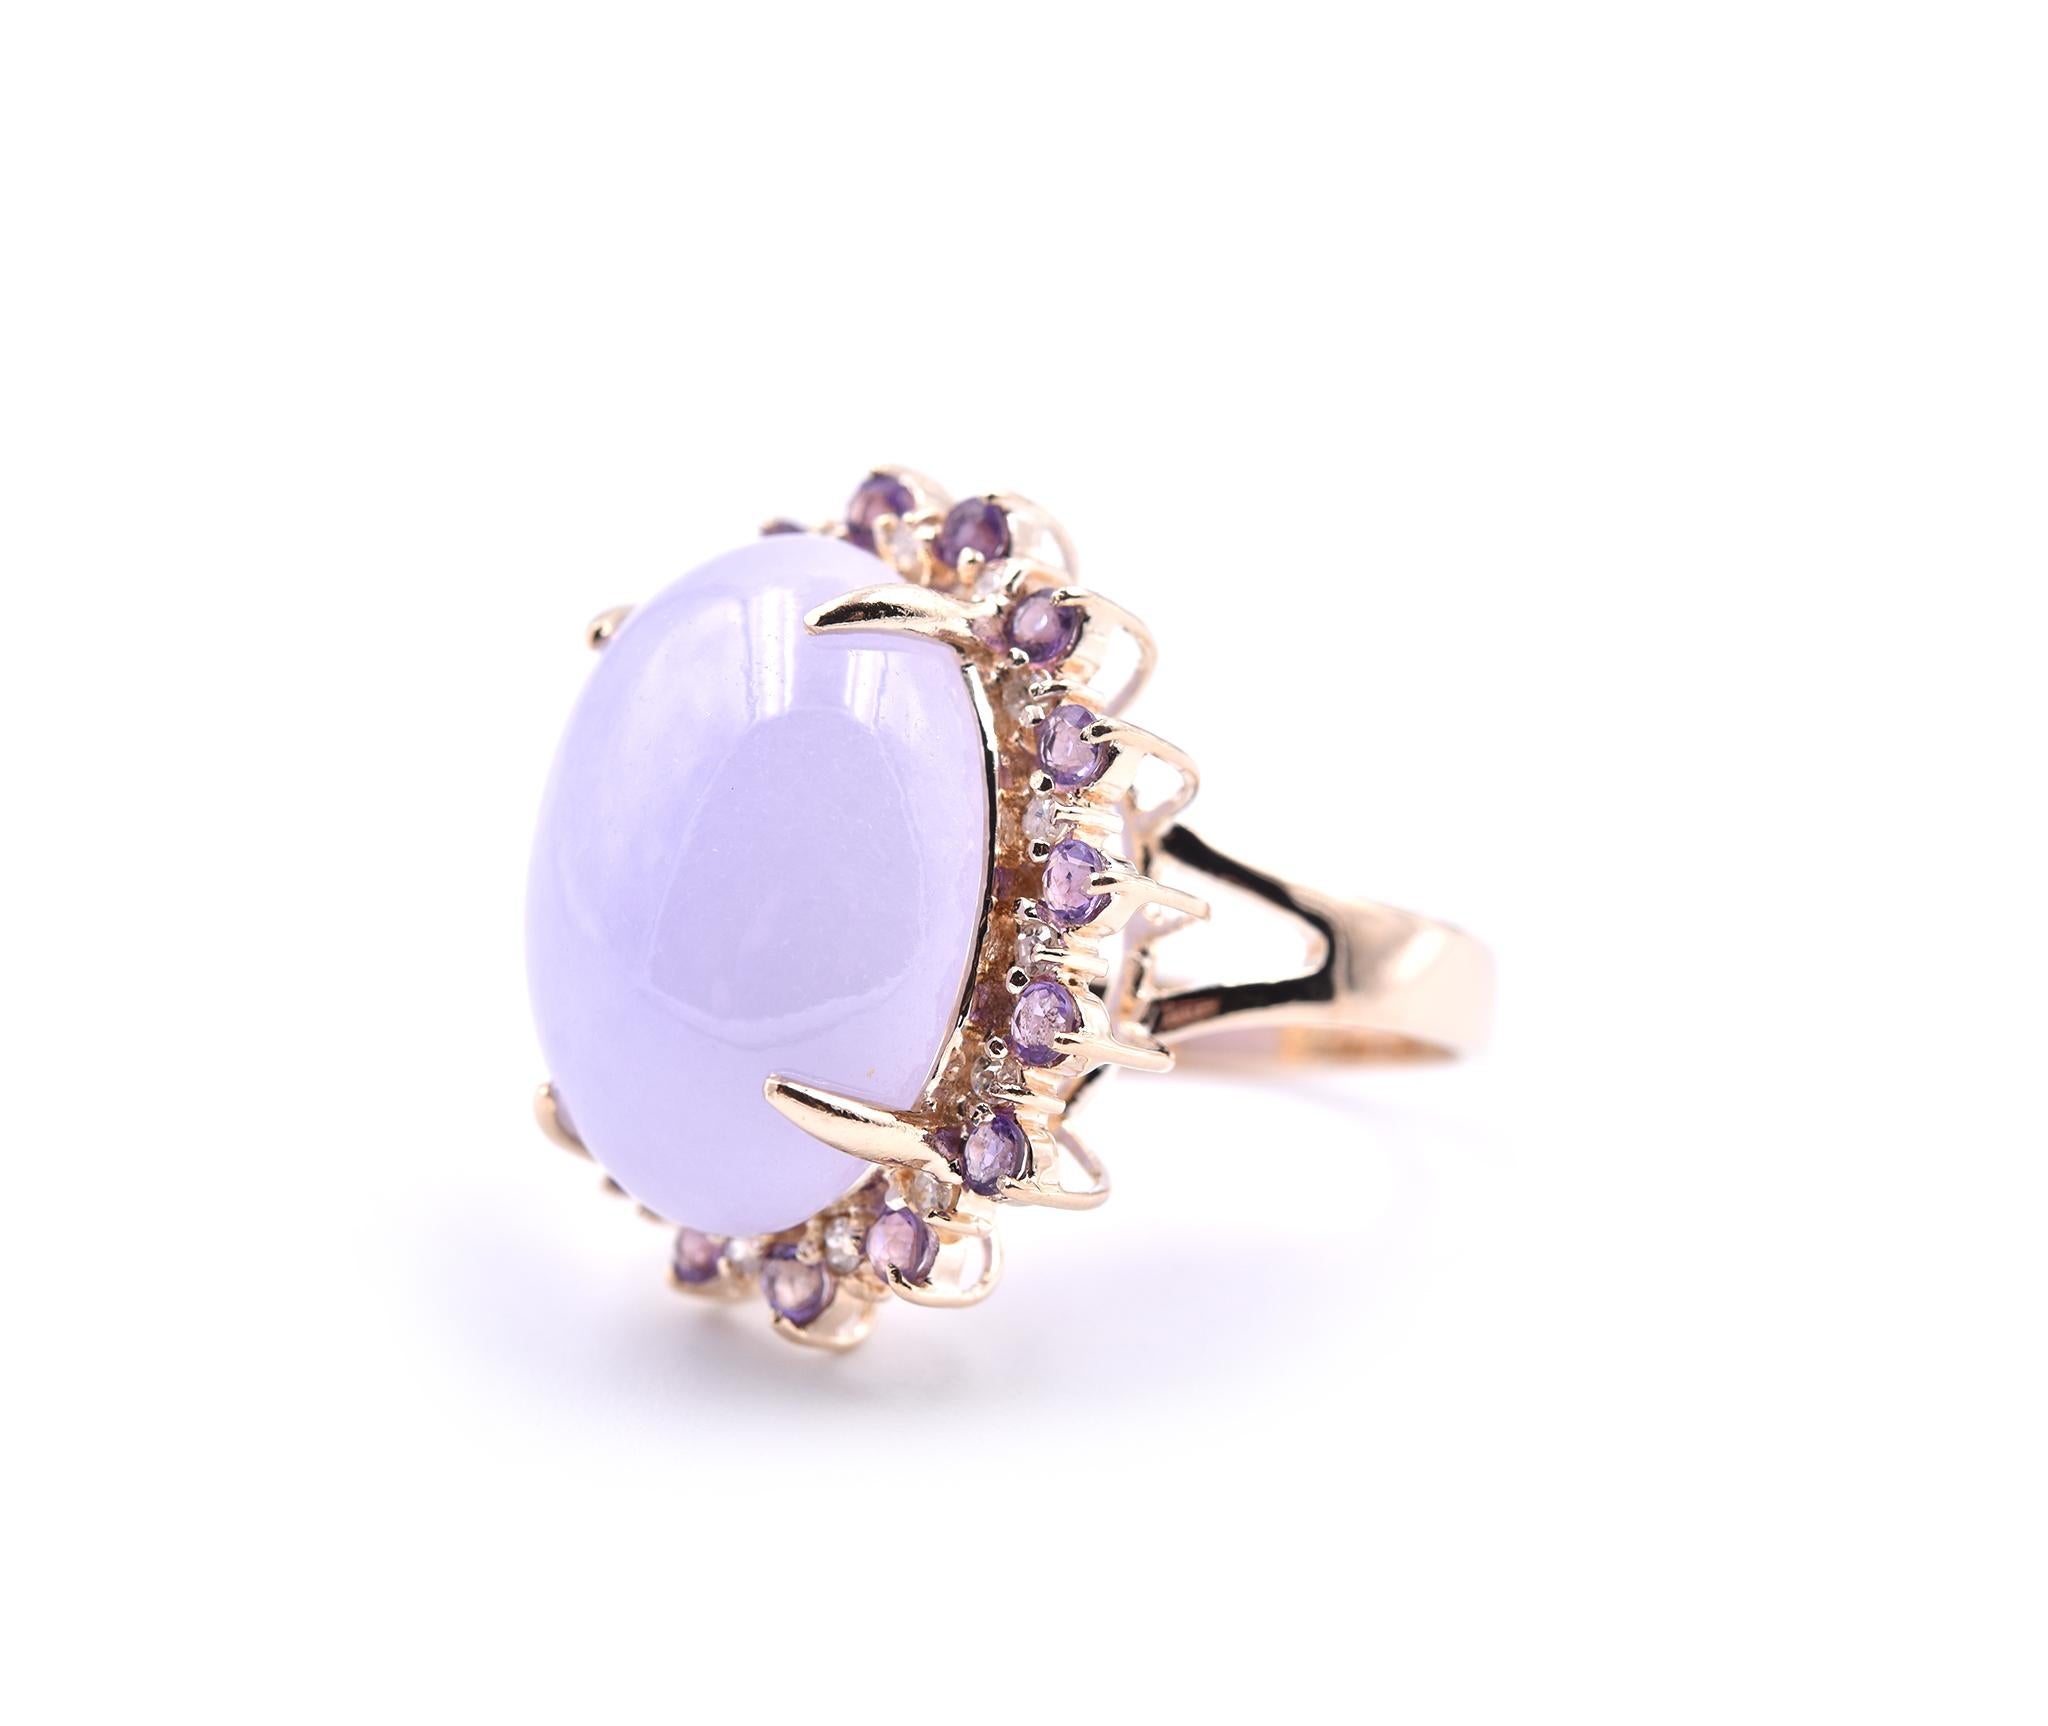 Designer: custom design
Material: 14k yellow gold
Center Stone: 1 cabochon lavender jade
Diamonds: 16 round brilliant cuts
Amethyst: 16 round cut amethyst
Ring Size: 7 ½ (please allow two additional shipping days for sizing requests)
Dimensions: